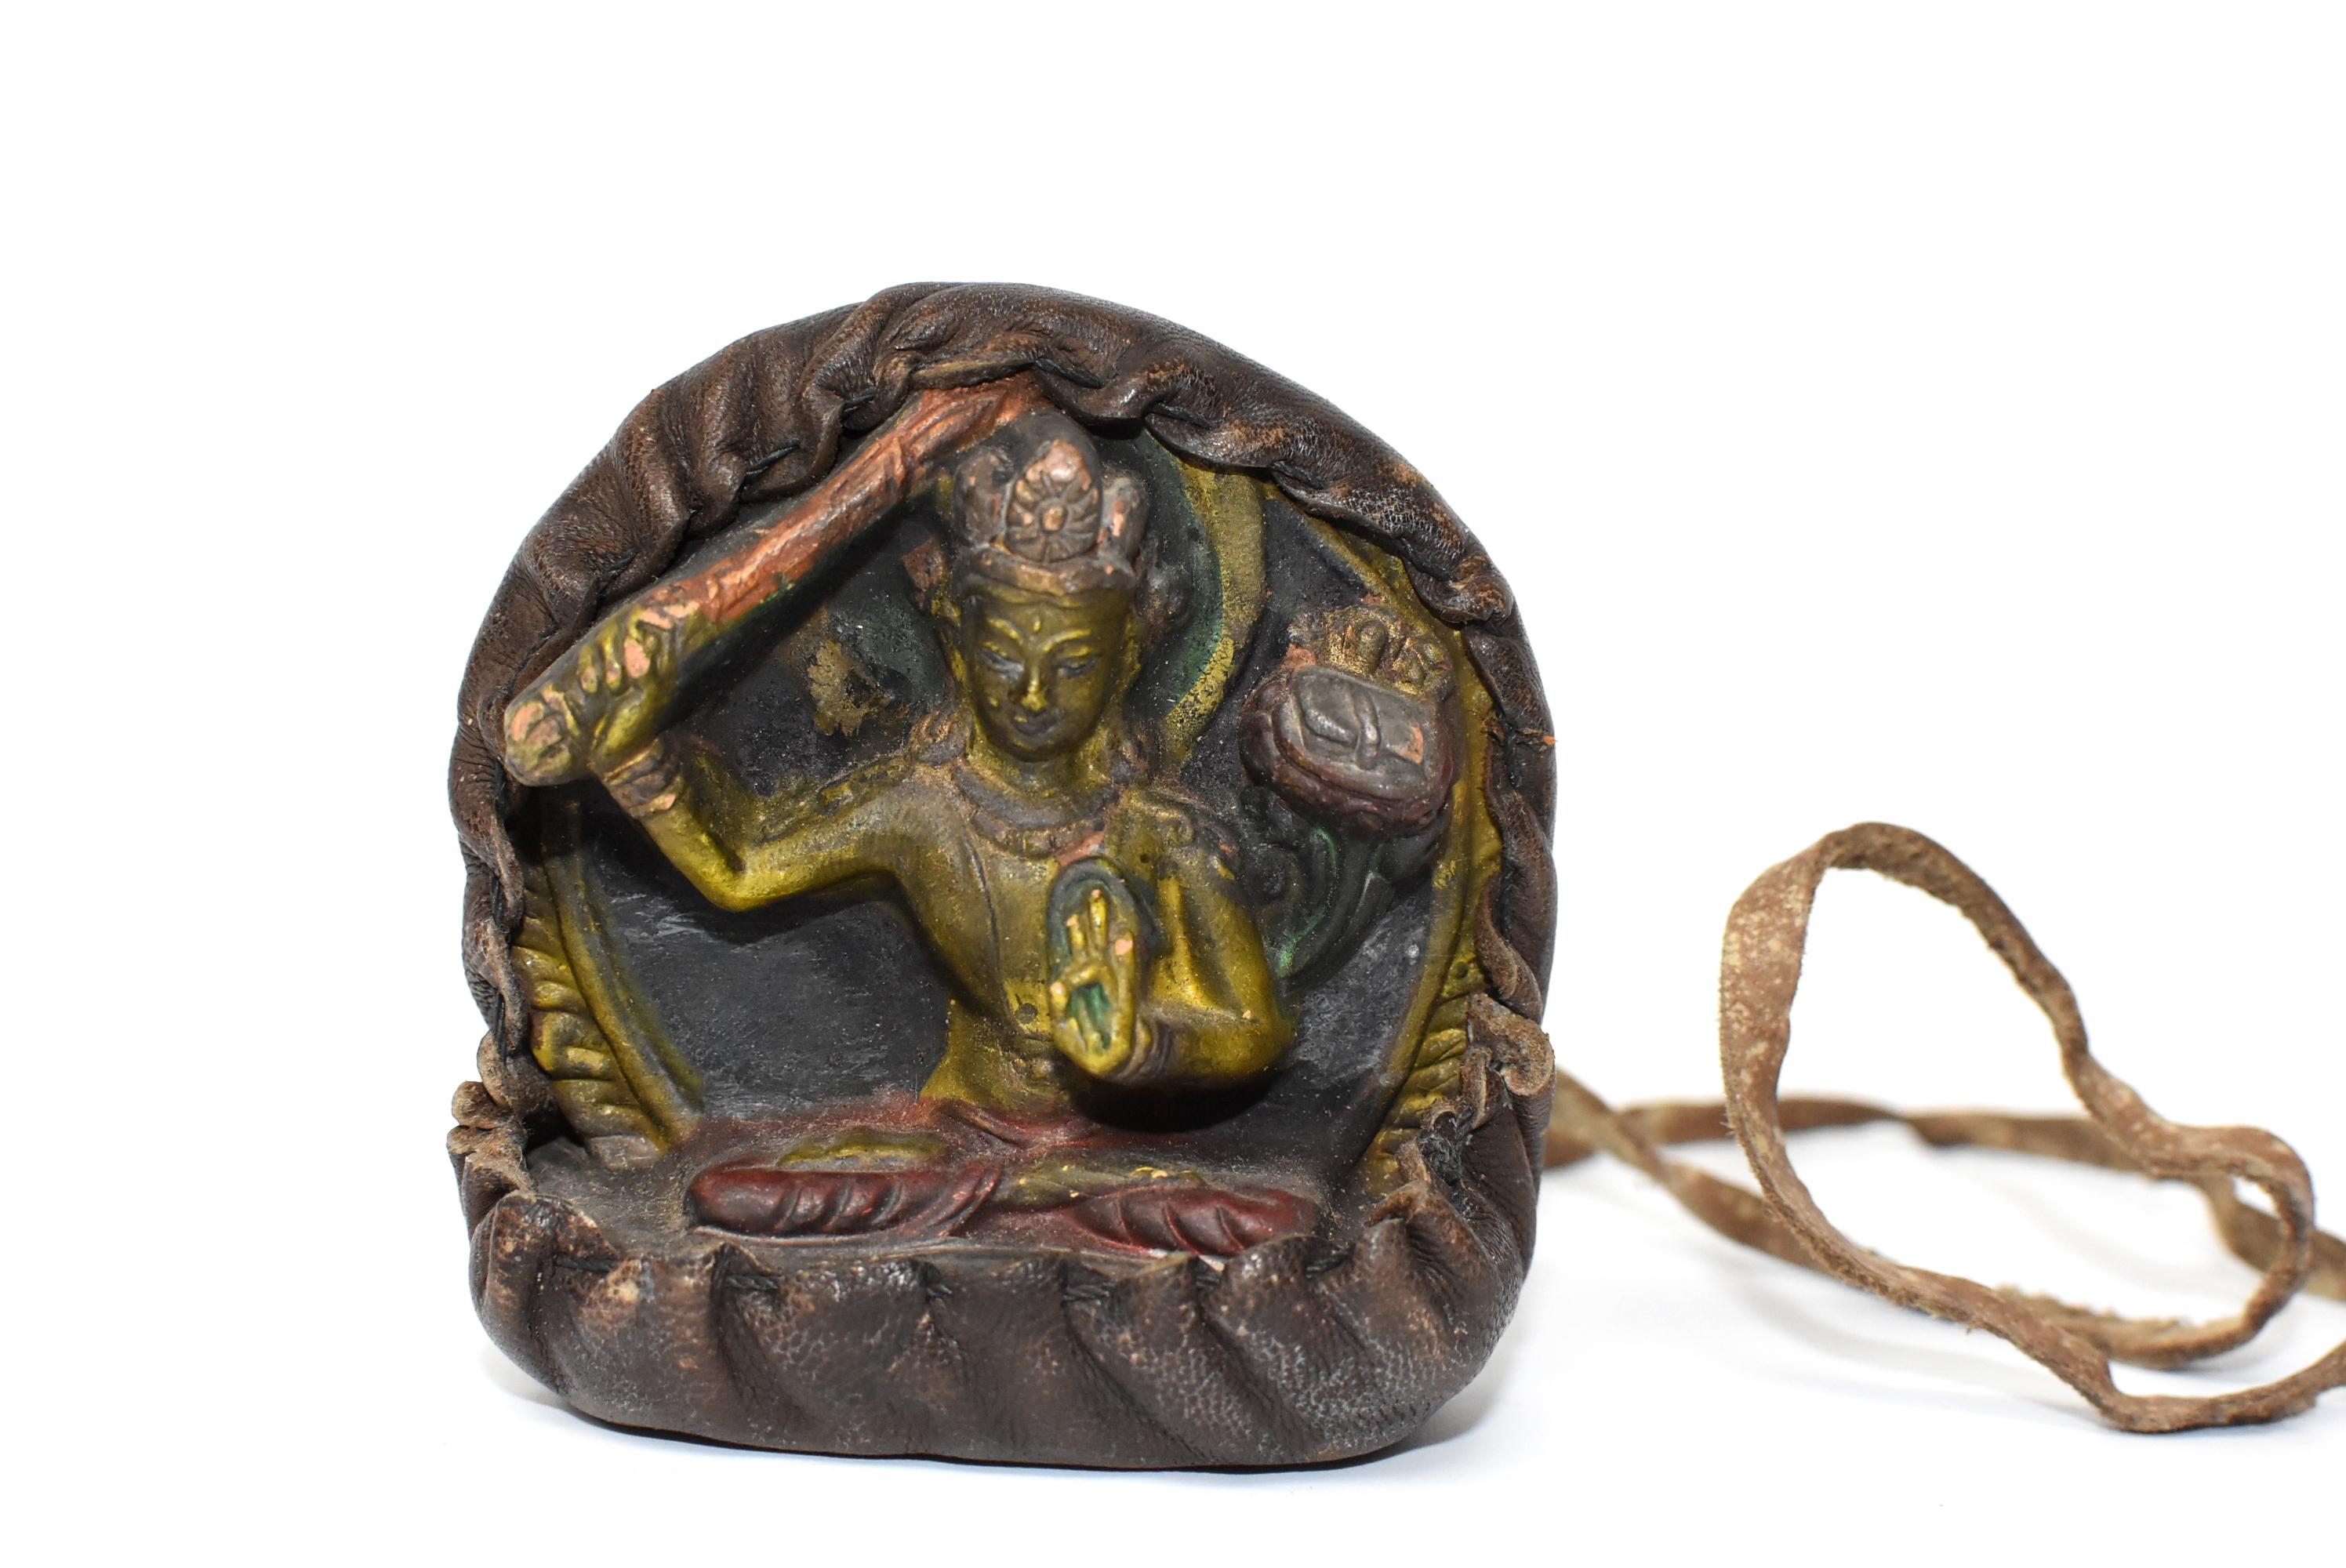 Hand-Carved Antique Tibetan Amulet, Leather with Tara Holding Sword